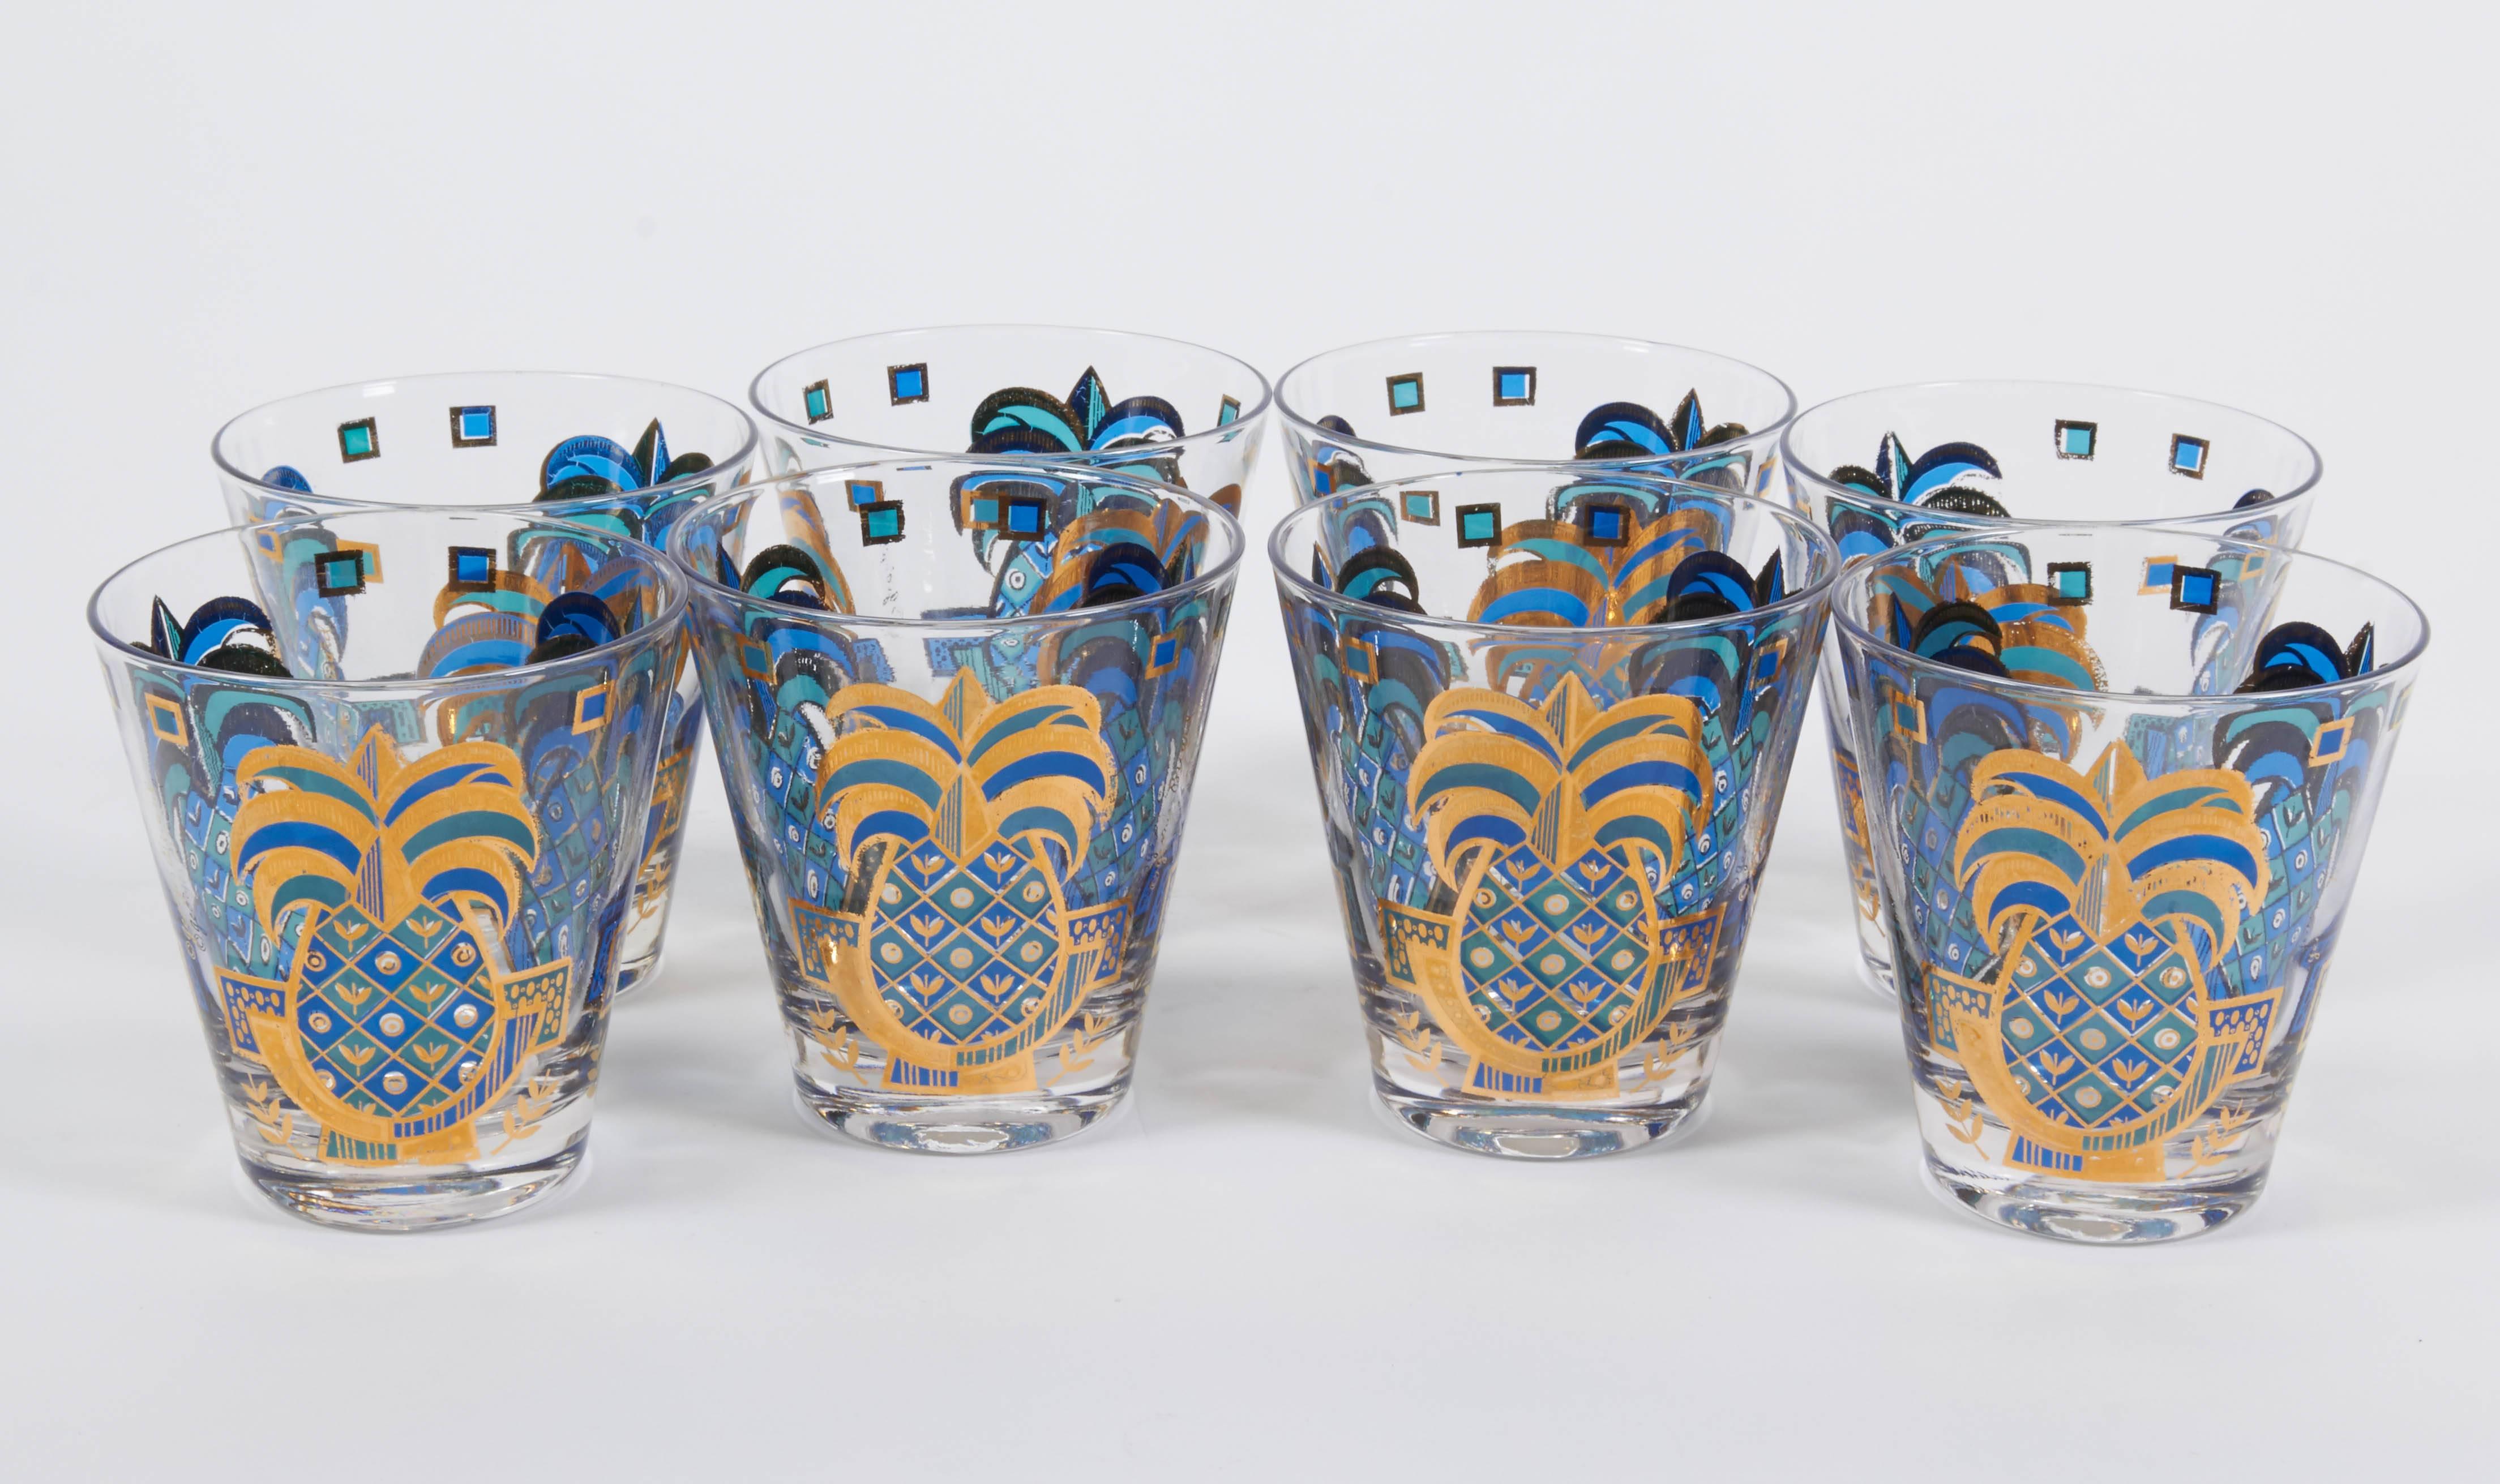 Set of eight, 1960s pineapple motif double old fashioned in teal blue and 24-karat gold by Georges Briard

Quality grade: Near mint unused vintage condition

Note: This pattern is one of the very few large-scale, geometrically-enhanced fruit